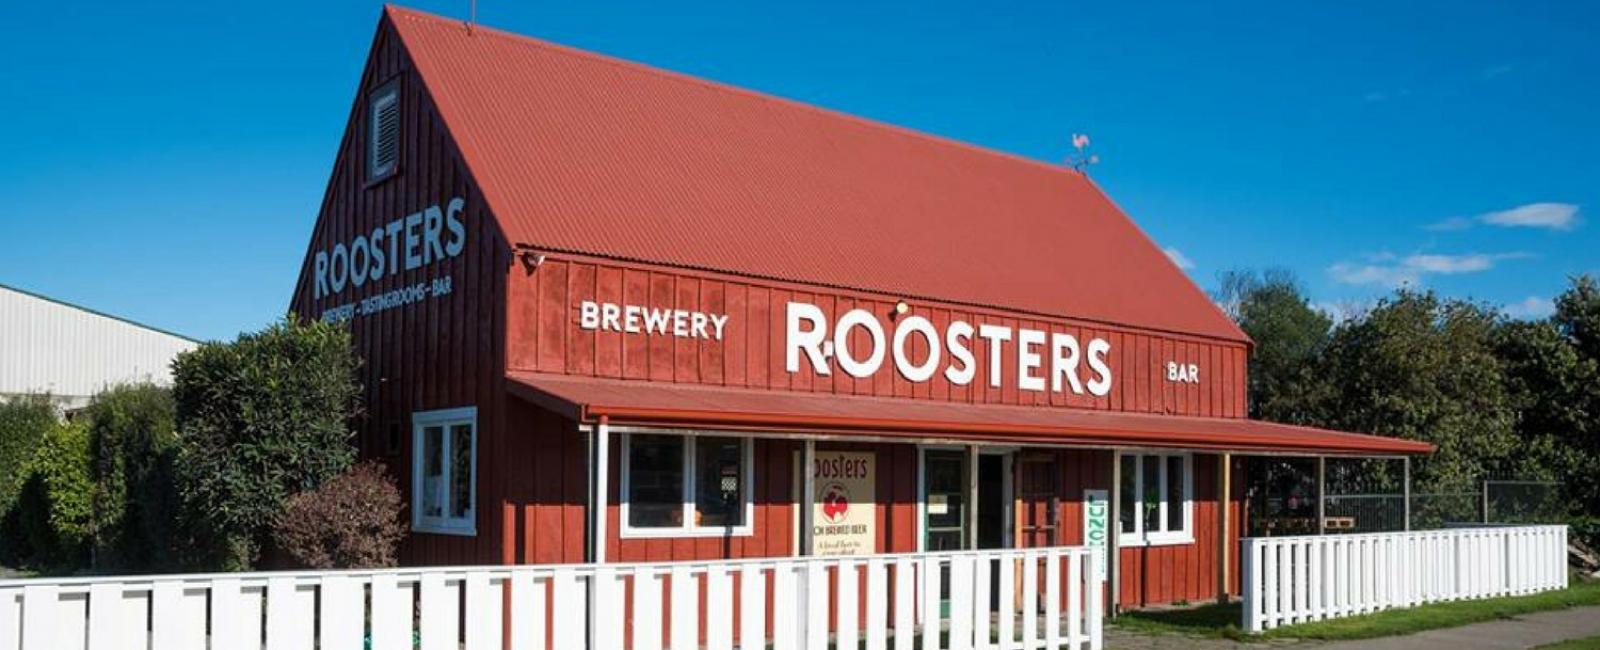 Roosters Craft Brewery